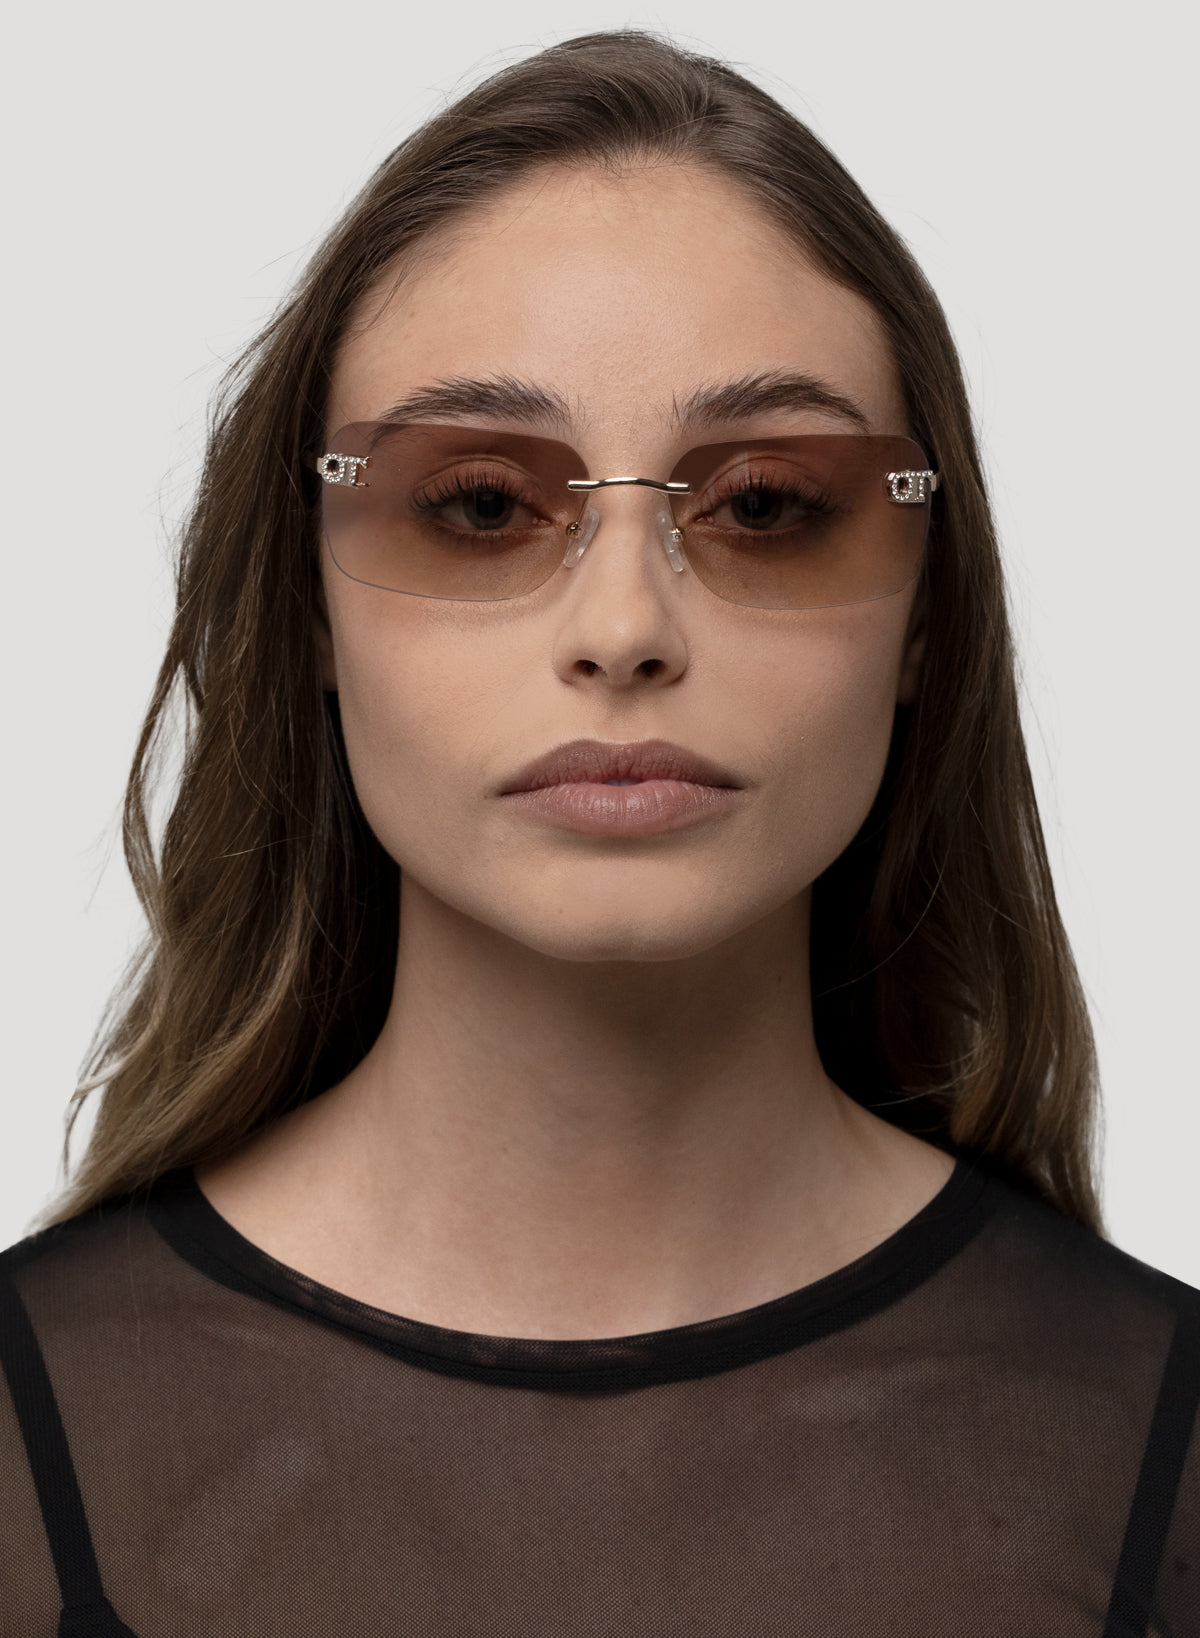 Model wearing Cara sunglasses in gold frame with brown lenses